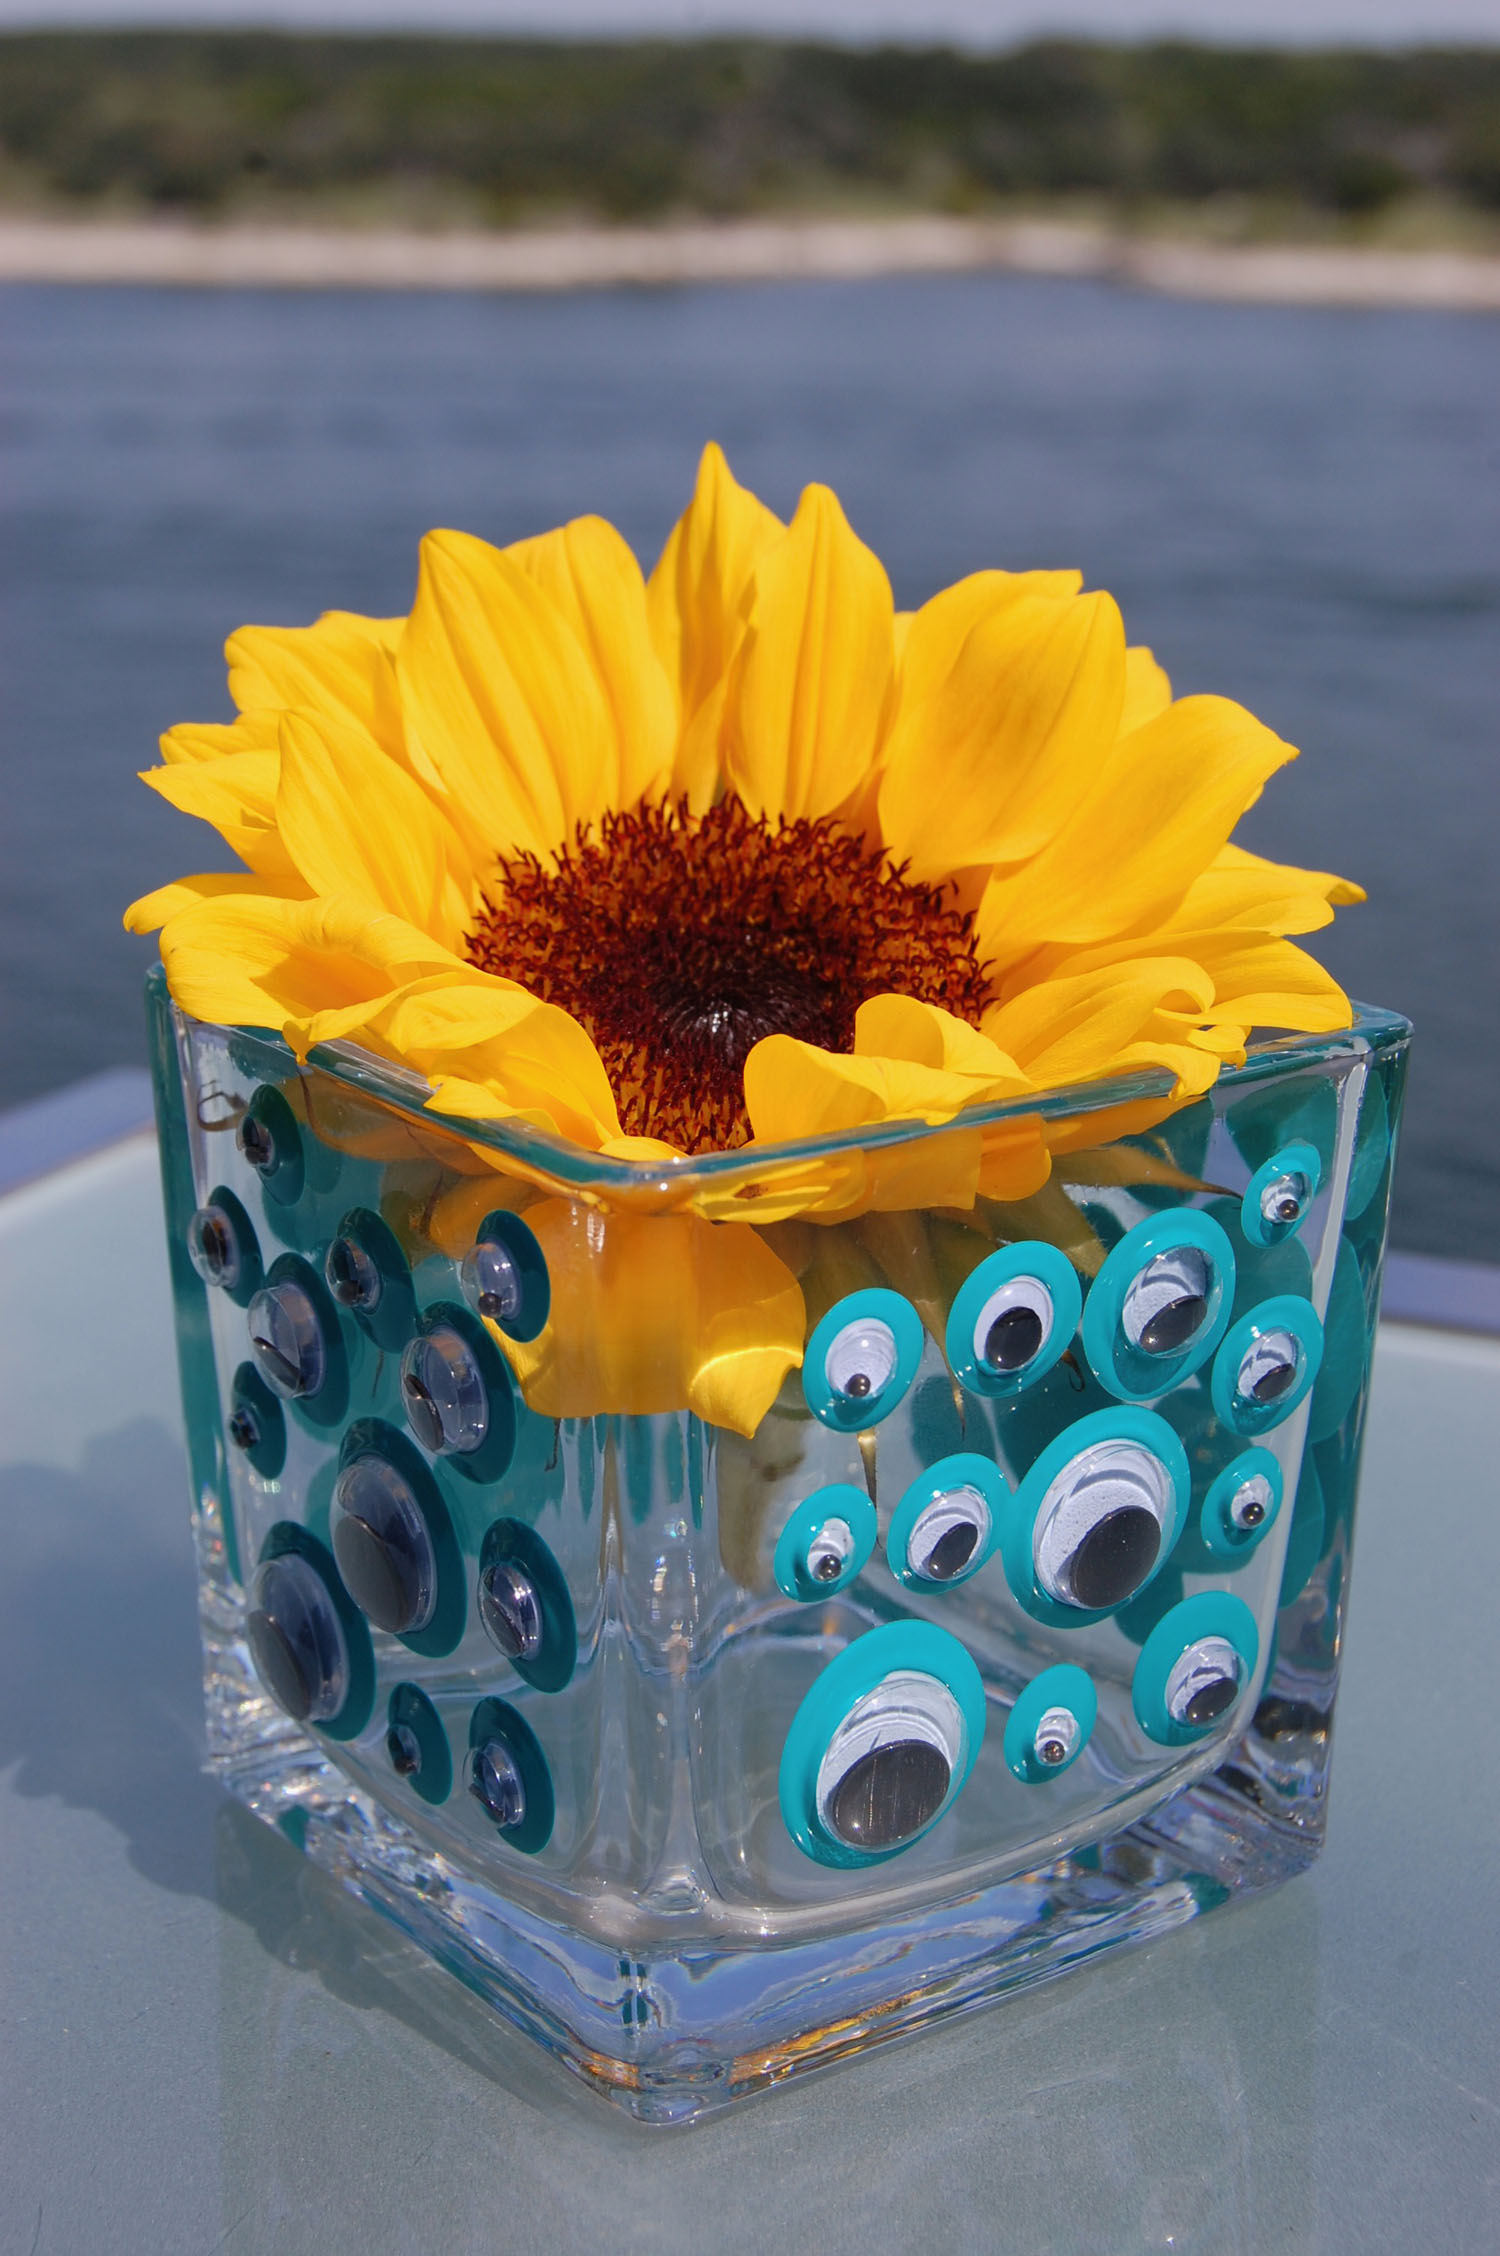 https://images.squarespace-cdn.com/content/v1/59595b49bebafb3c5c78a38b/1504403463659-1NFKM9NBOHWZZXYQW1MS/turquoise-candle-holder-vase-sunflower-1500.jpg?format=2500w